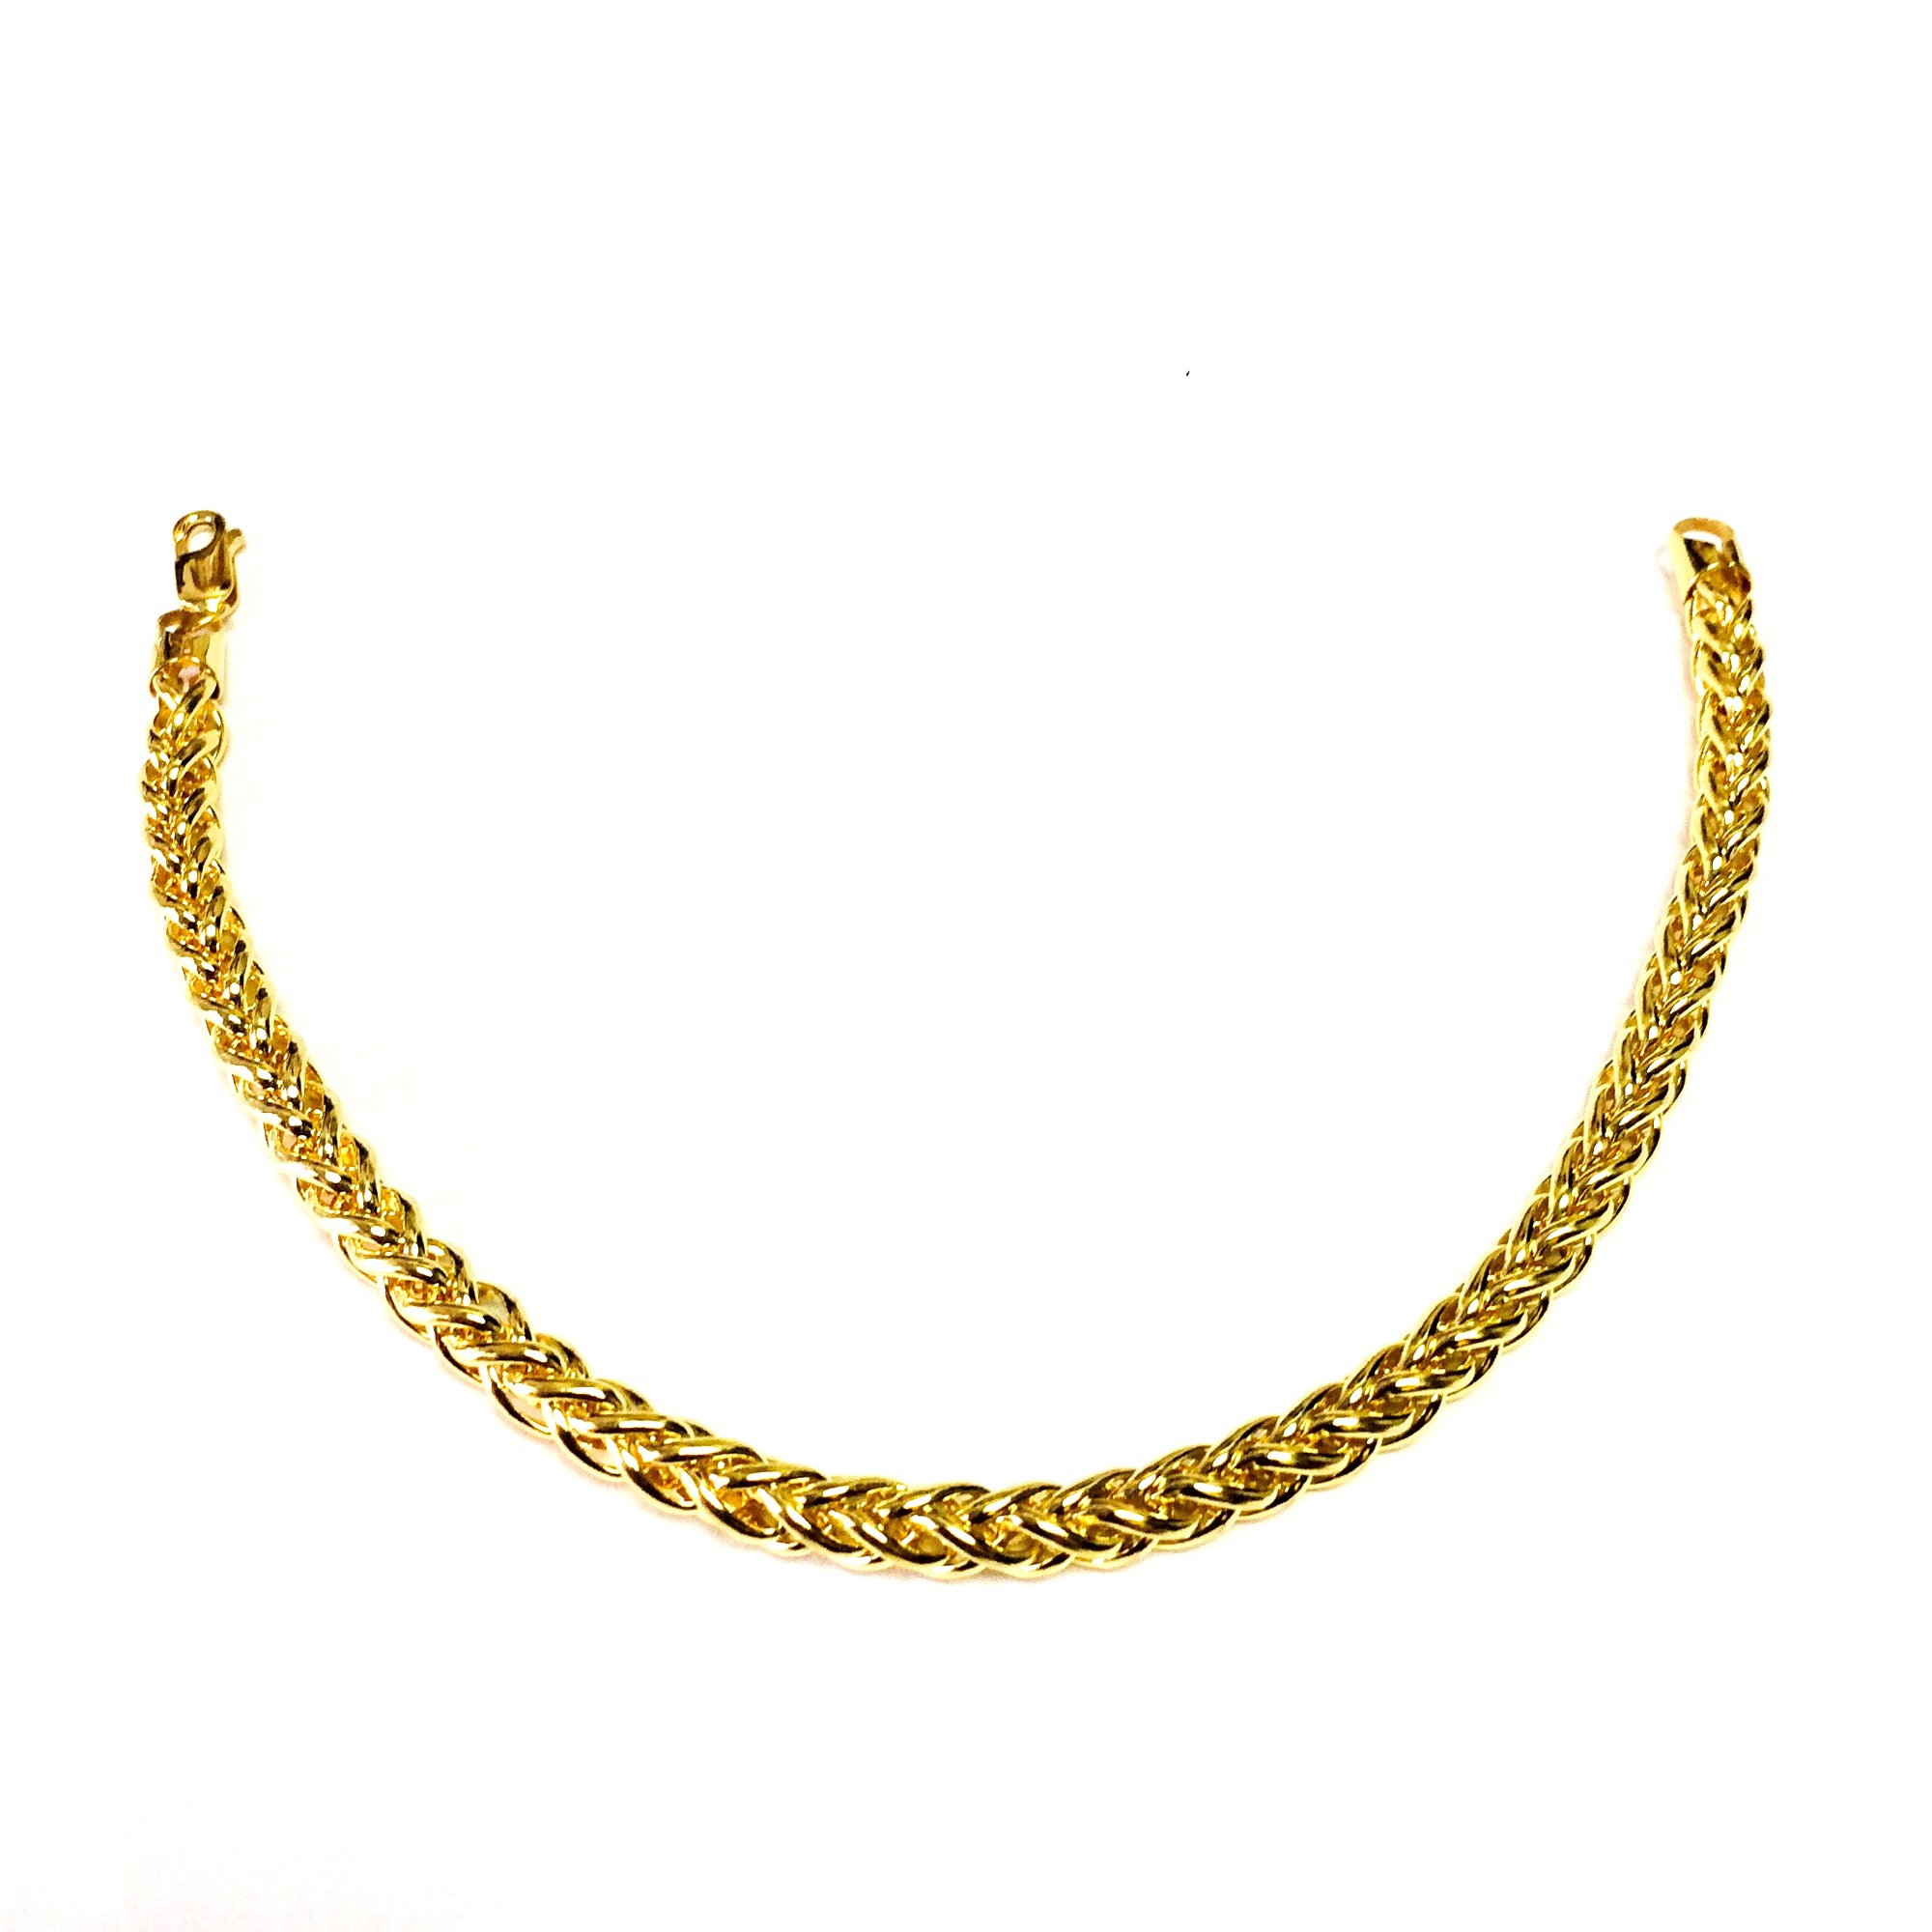 14K Yellow Gold Filled Round Franco Chain Bracelet, 6.0mm, 8.5